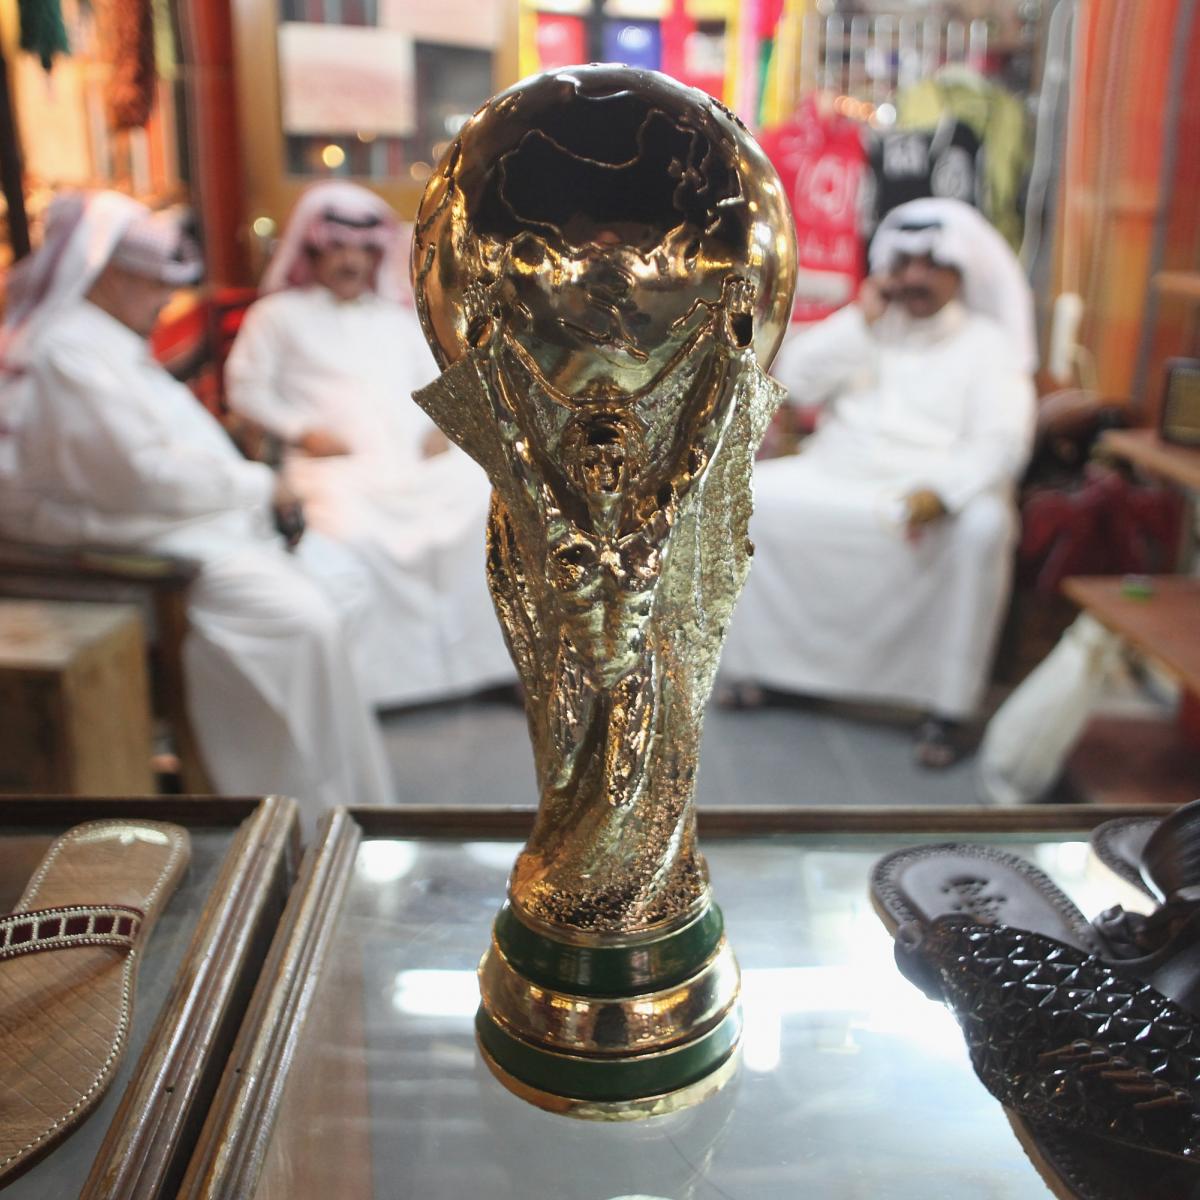 Qatar 2022: 5 Reasons Why Their World Cup Could Be a Huge Success